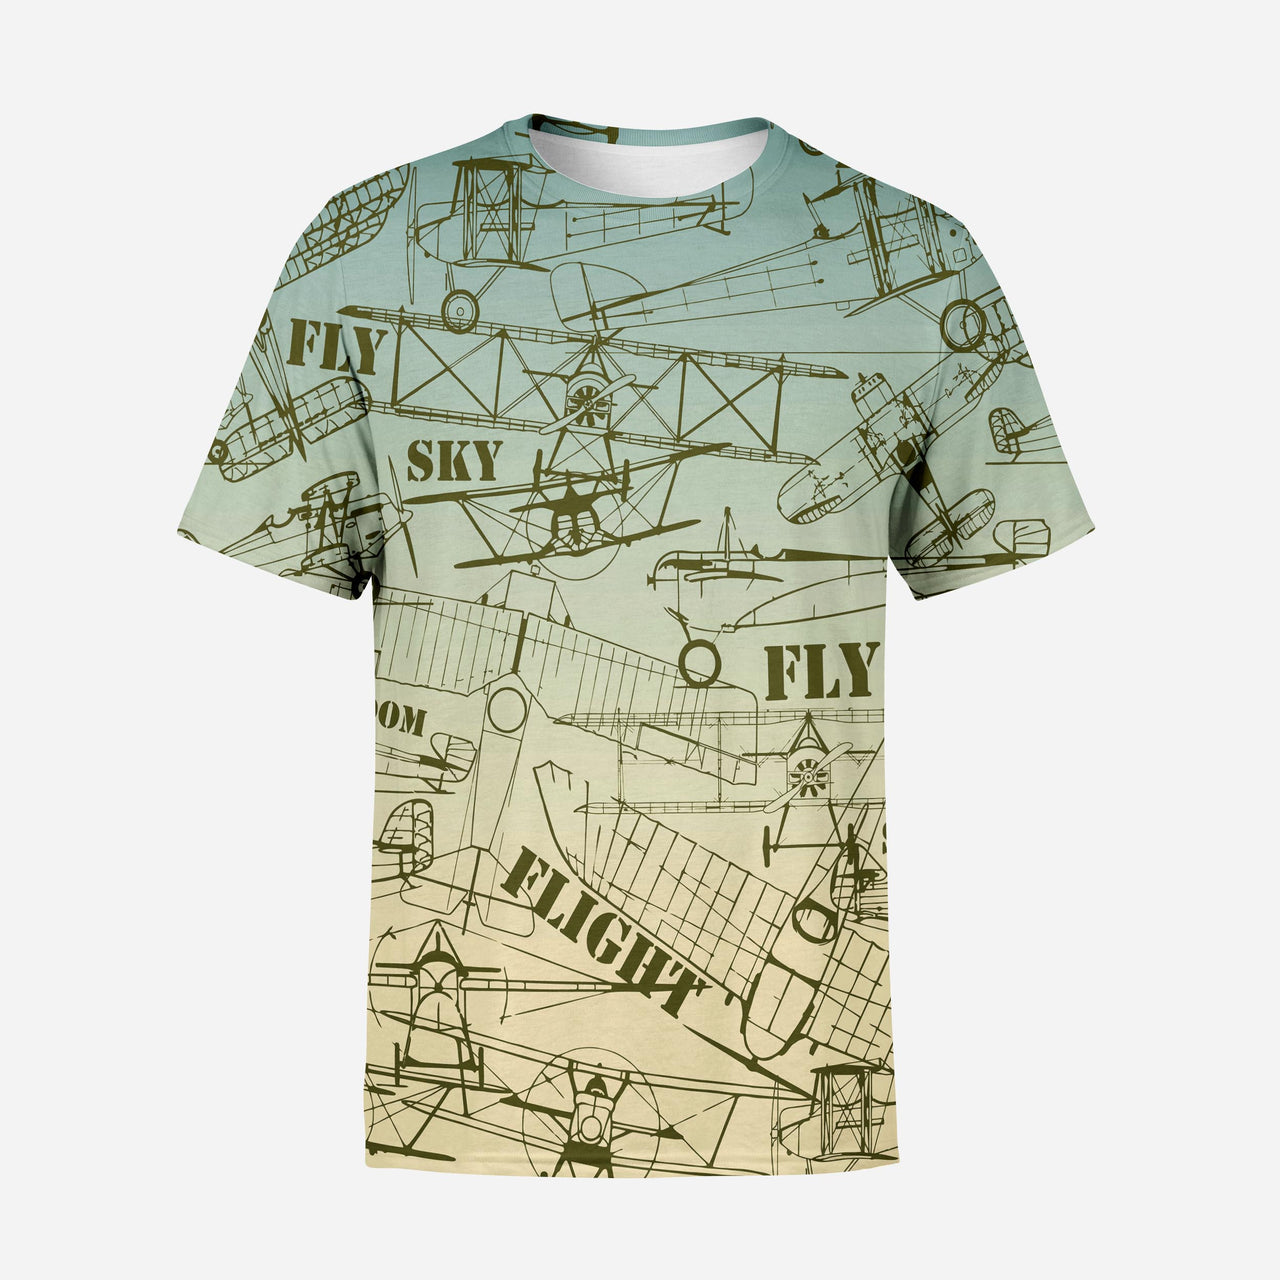 Retro Airplanes & Text Printed 3D T-Shirts